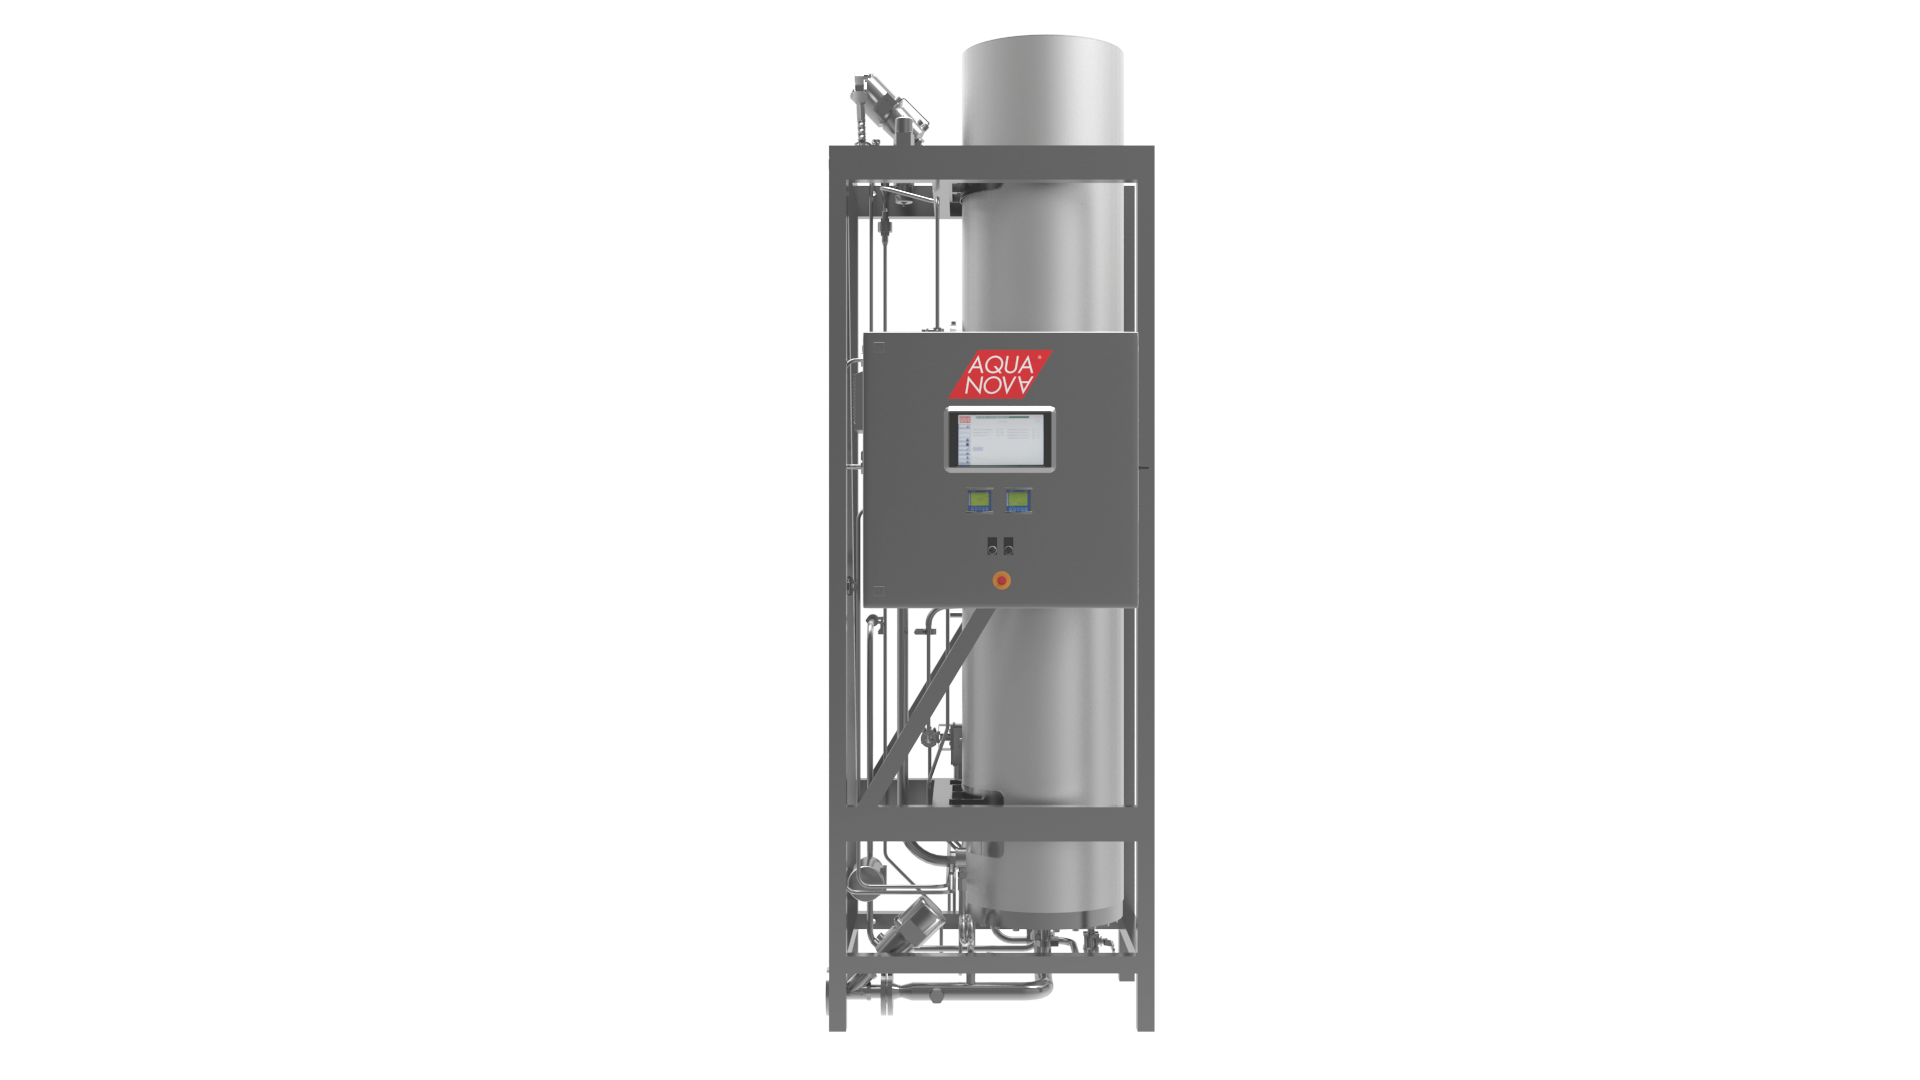 Vertical AQUA-NOVA® Pure Steam Generator displayed in isolation, featuring a tall cylindrical chamber with a control panel and structural framework, specifically designed to produce high-quality pure steam.